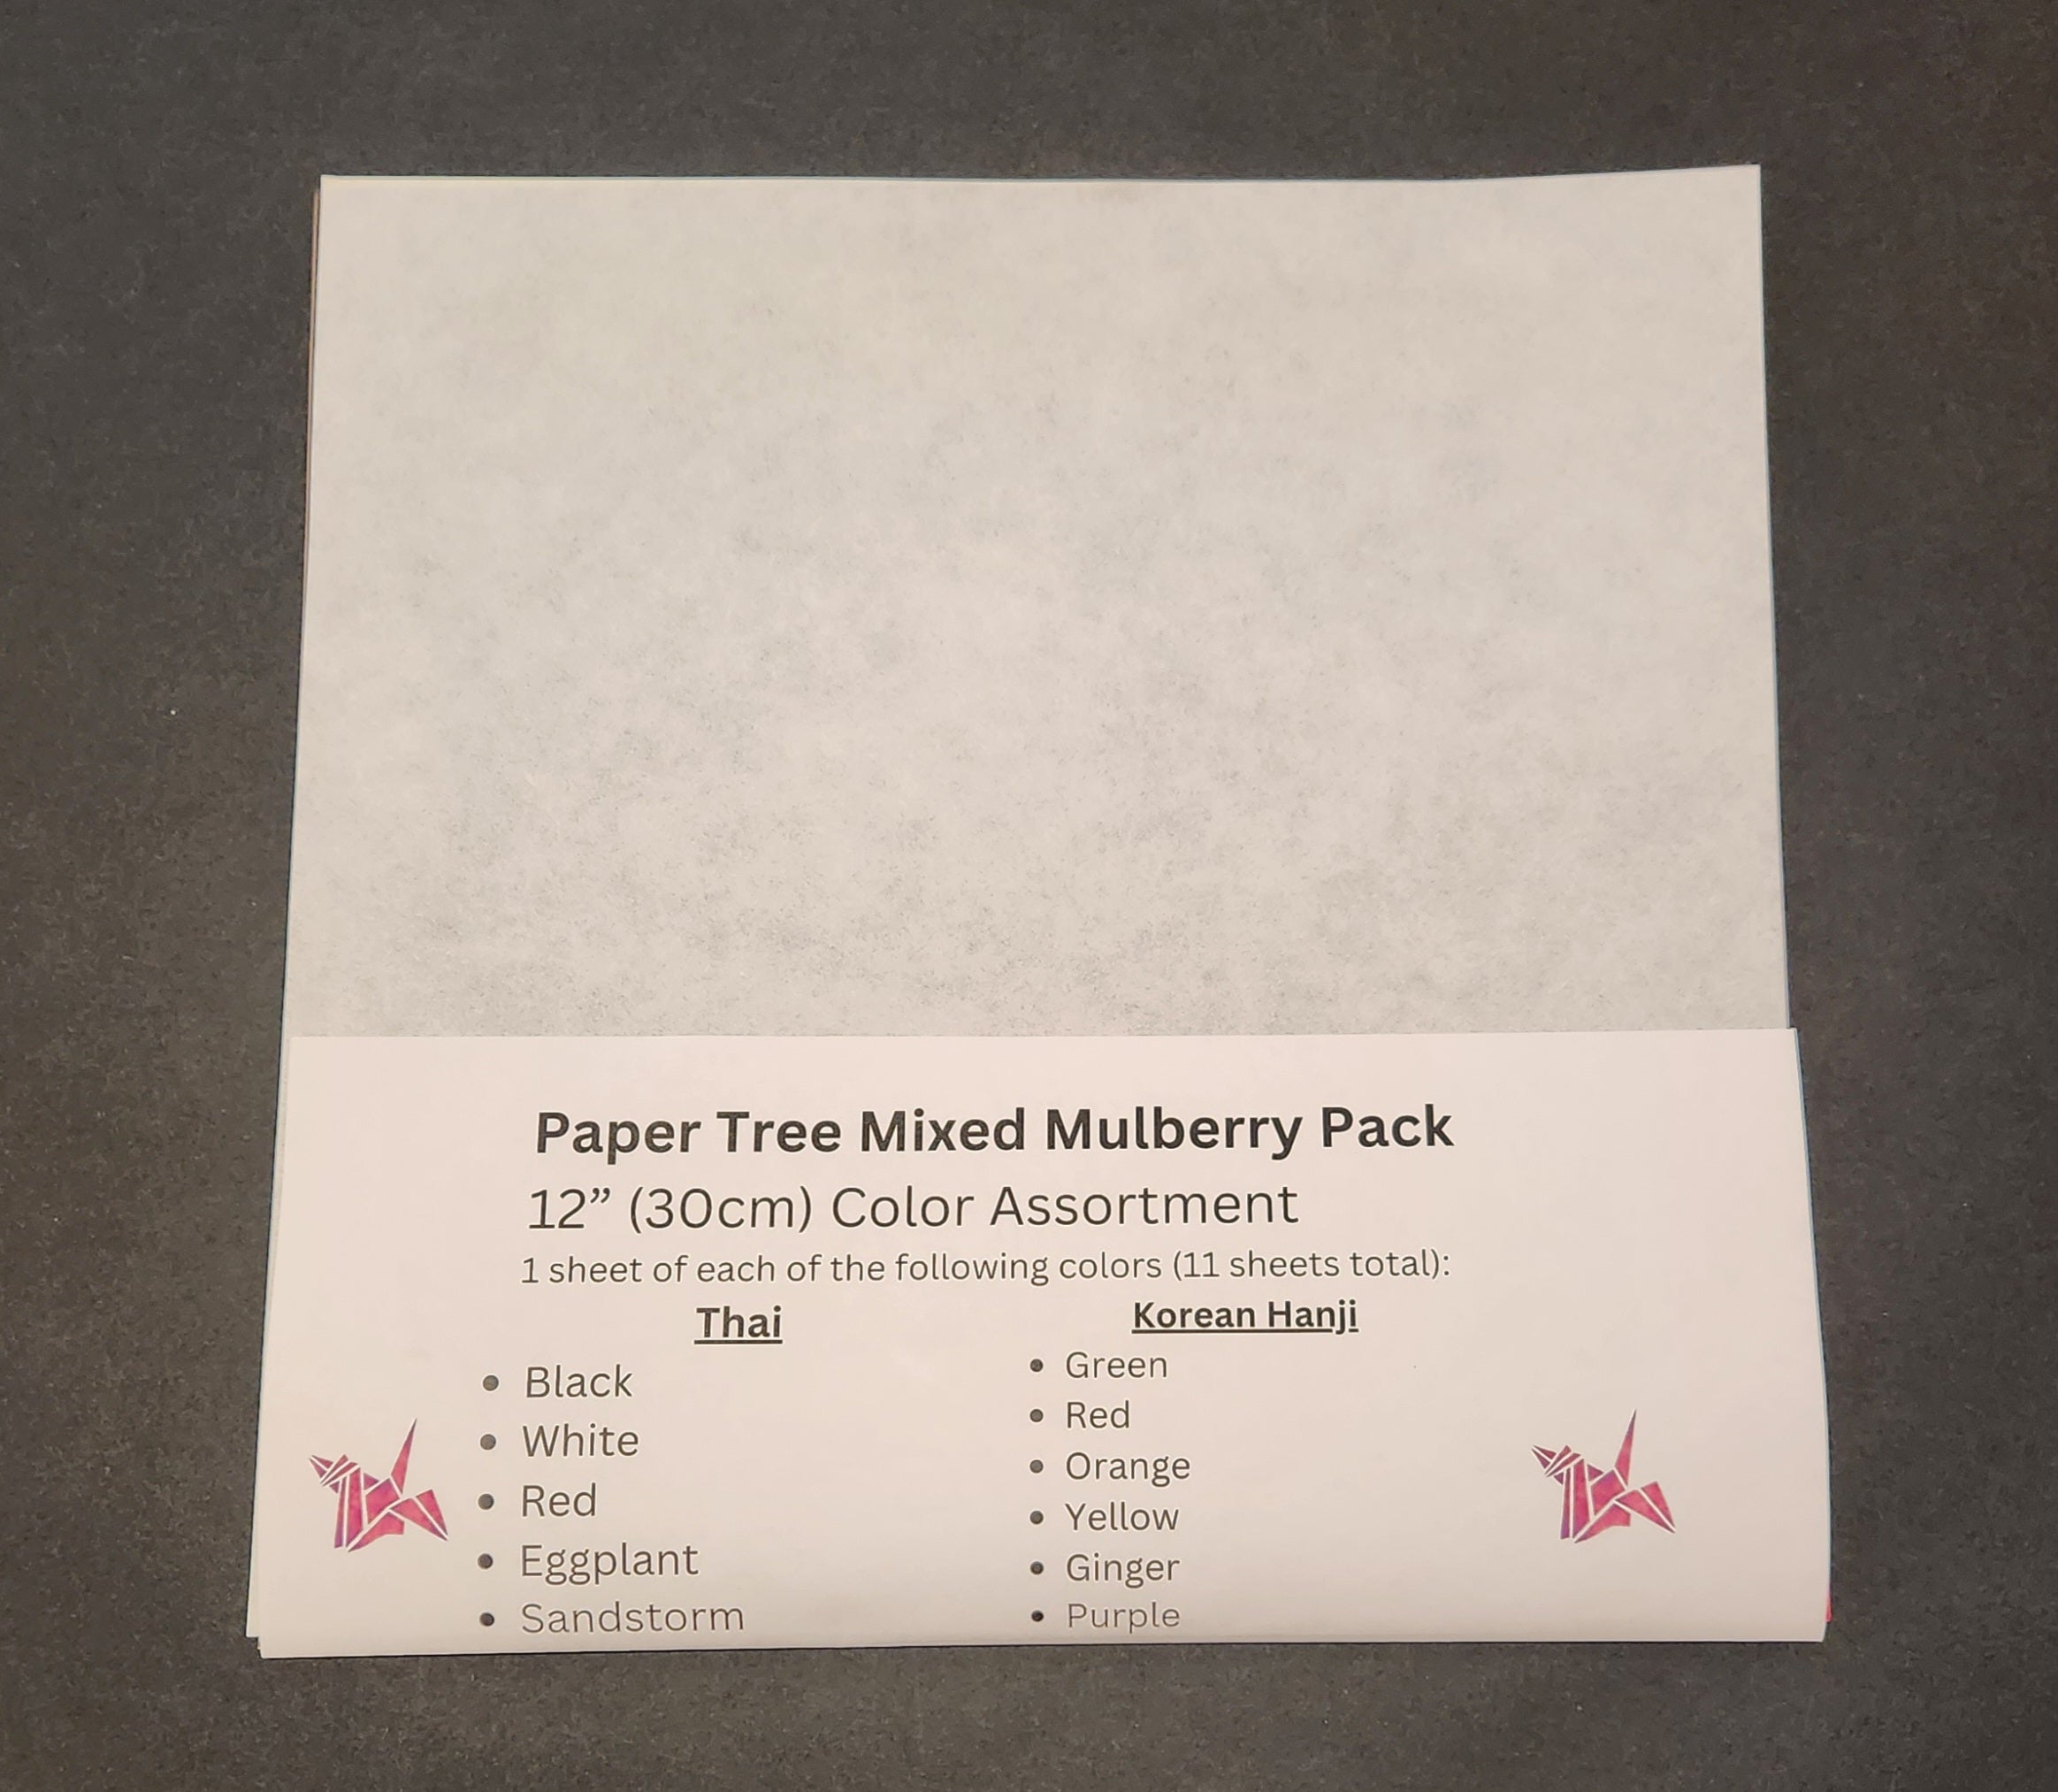 Paper Tree Mixed Mulberry 12" Pack